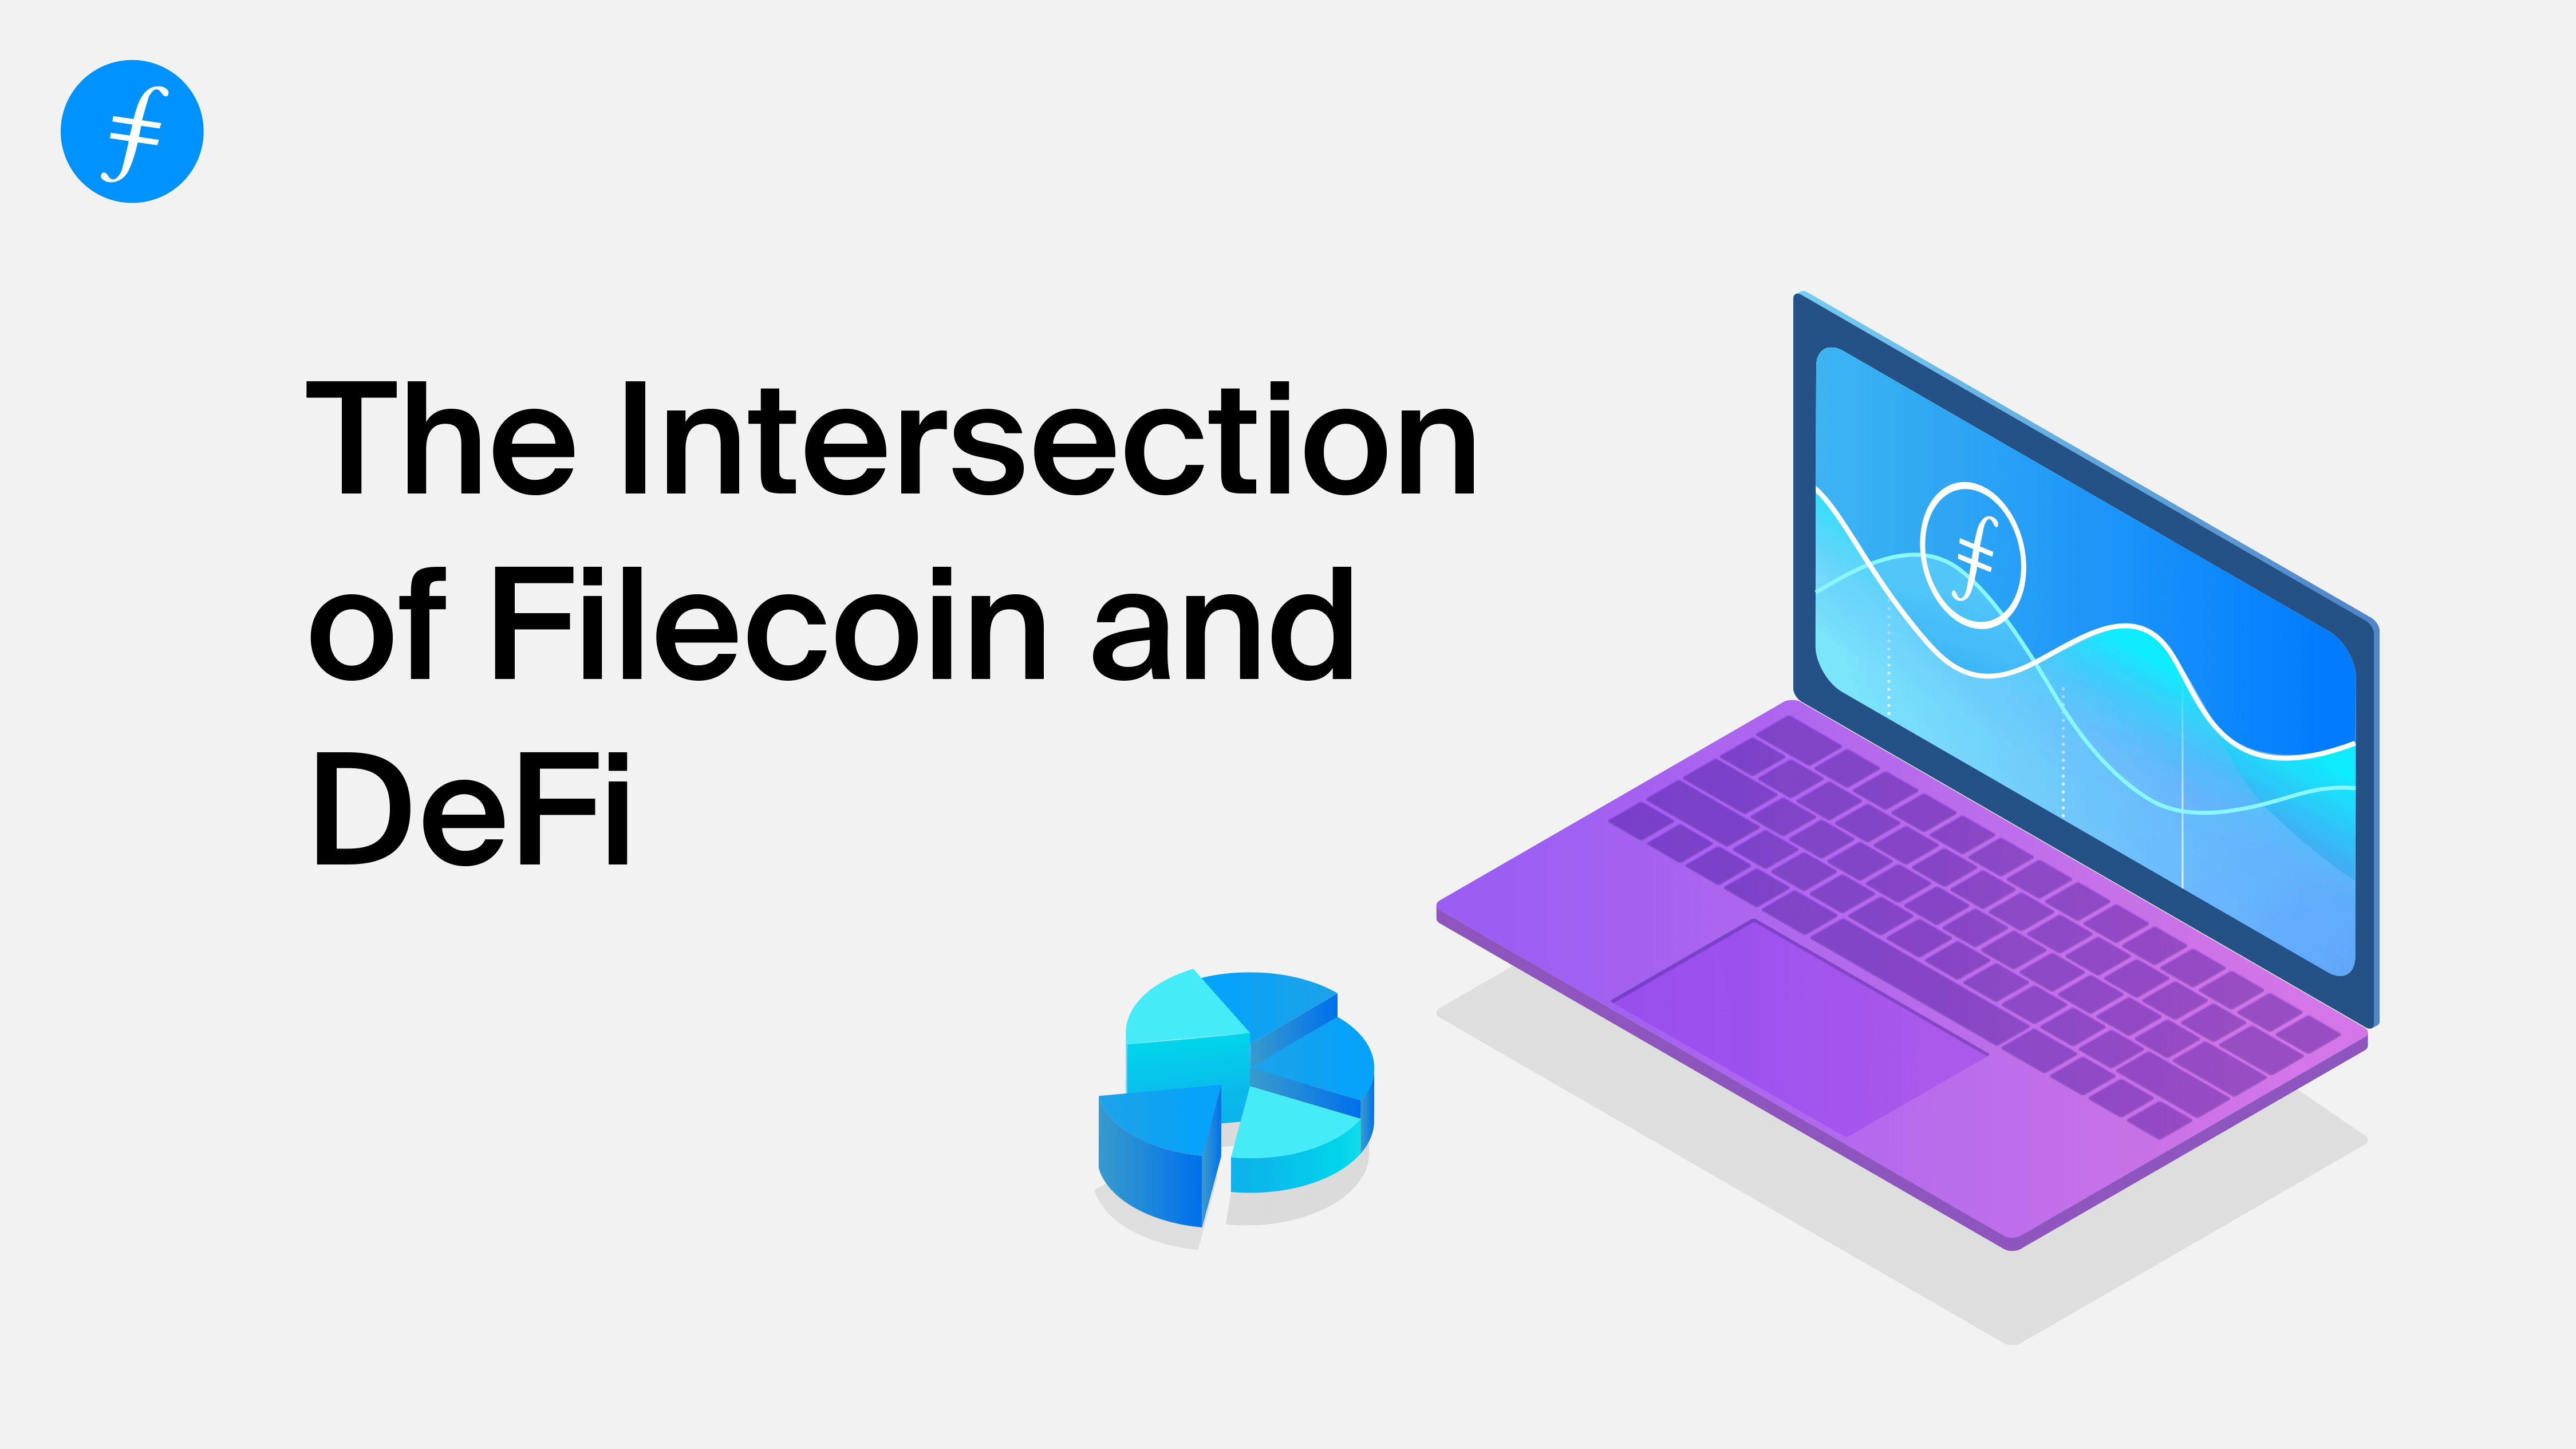 The Intersection of Filecoin and DeFi